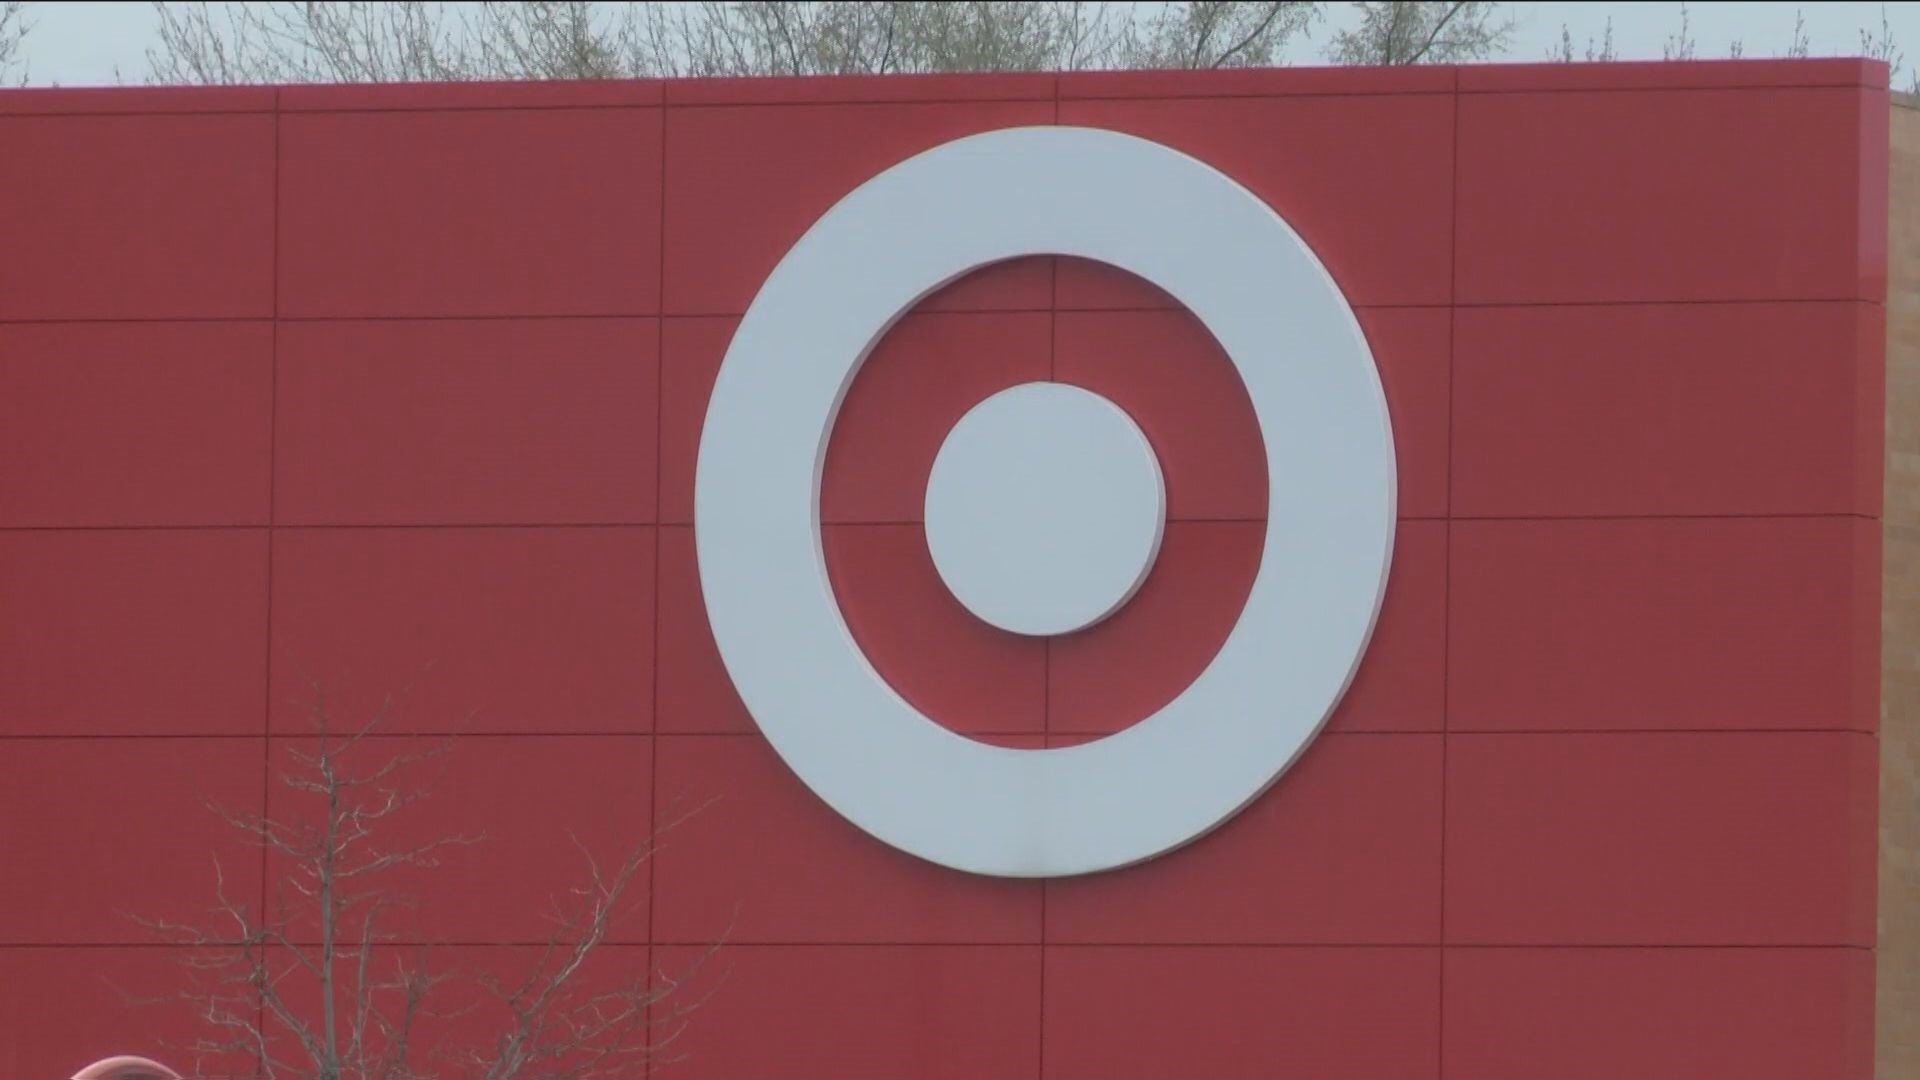 Target announced Wednesday it will invest $2 billion over the next five years with Black-owned businesses.